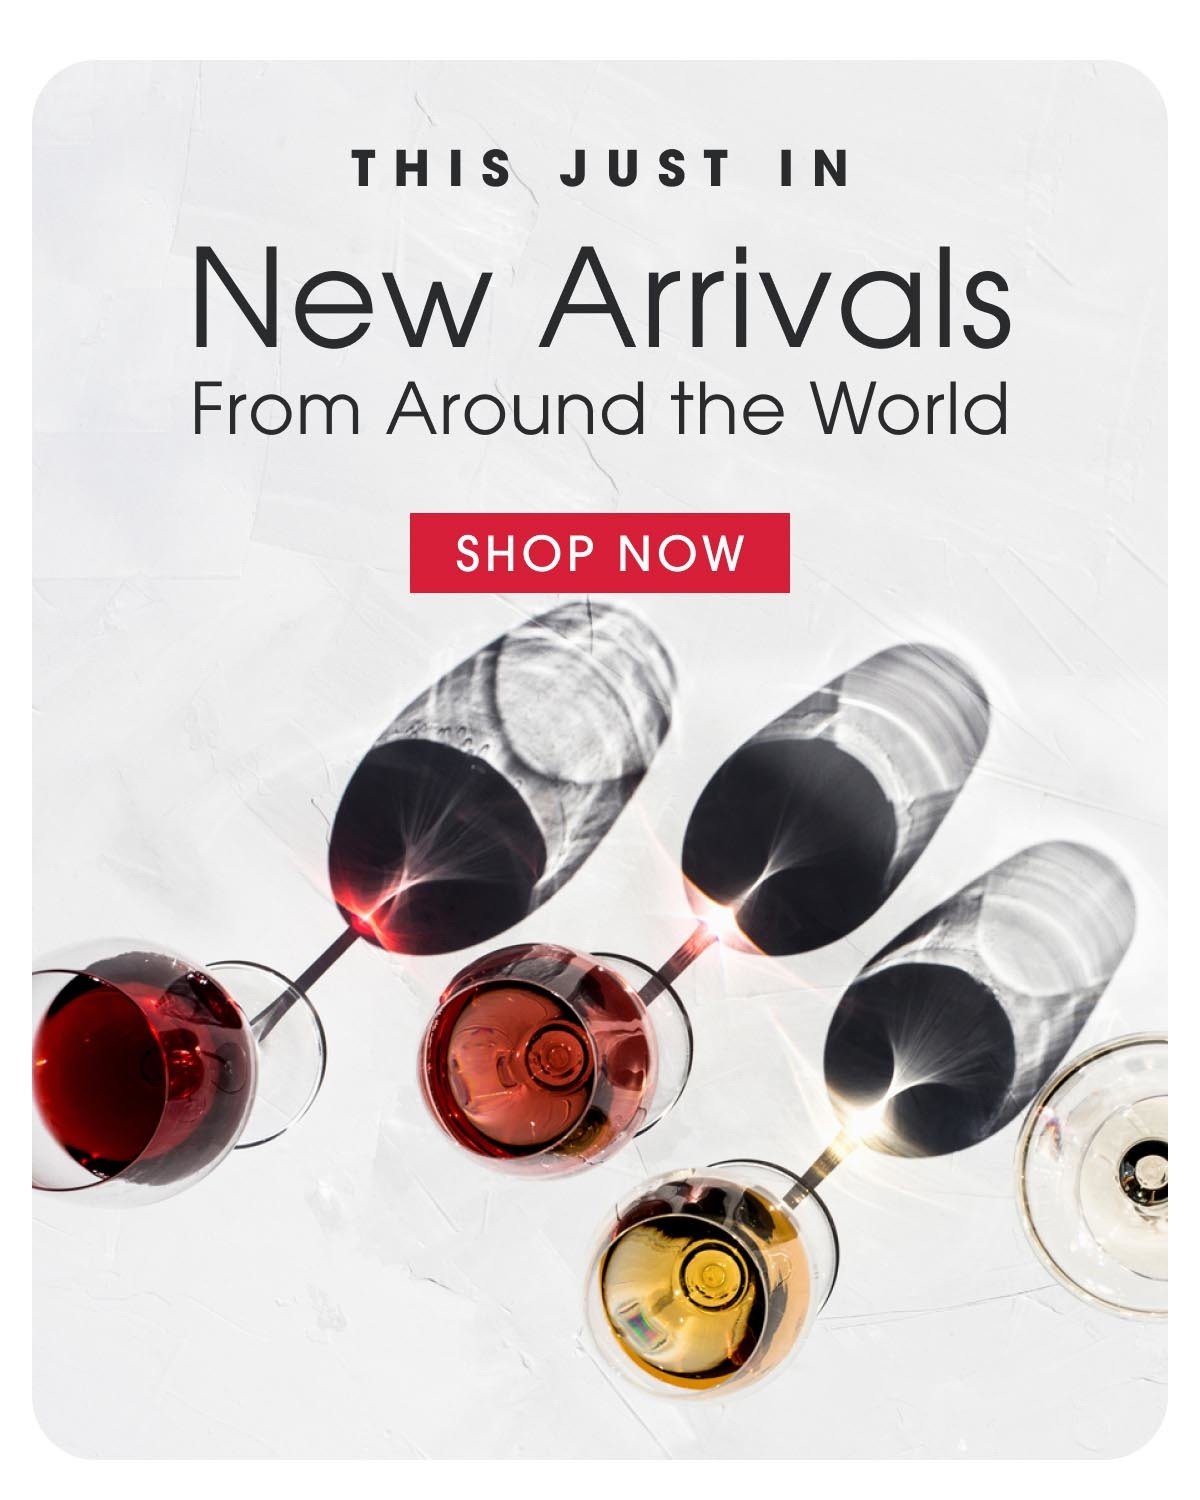 New arrivals from around the world